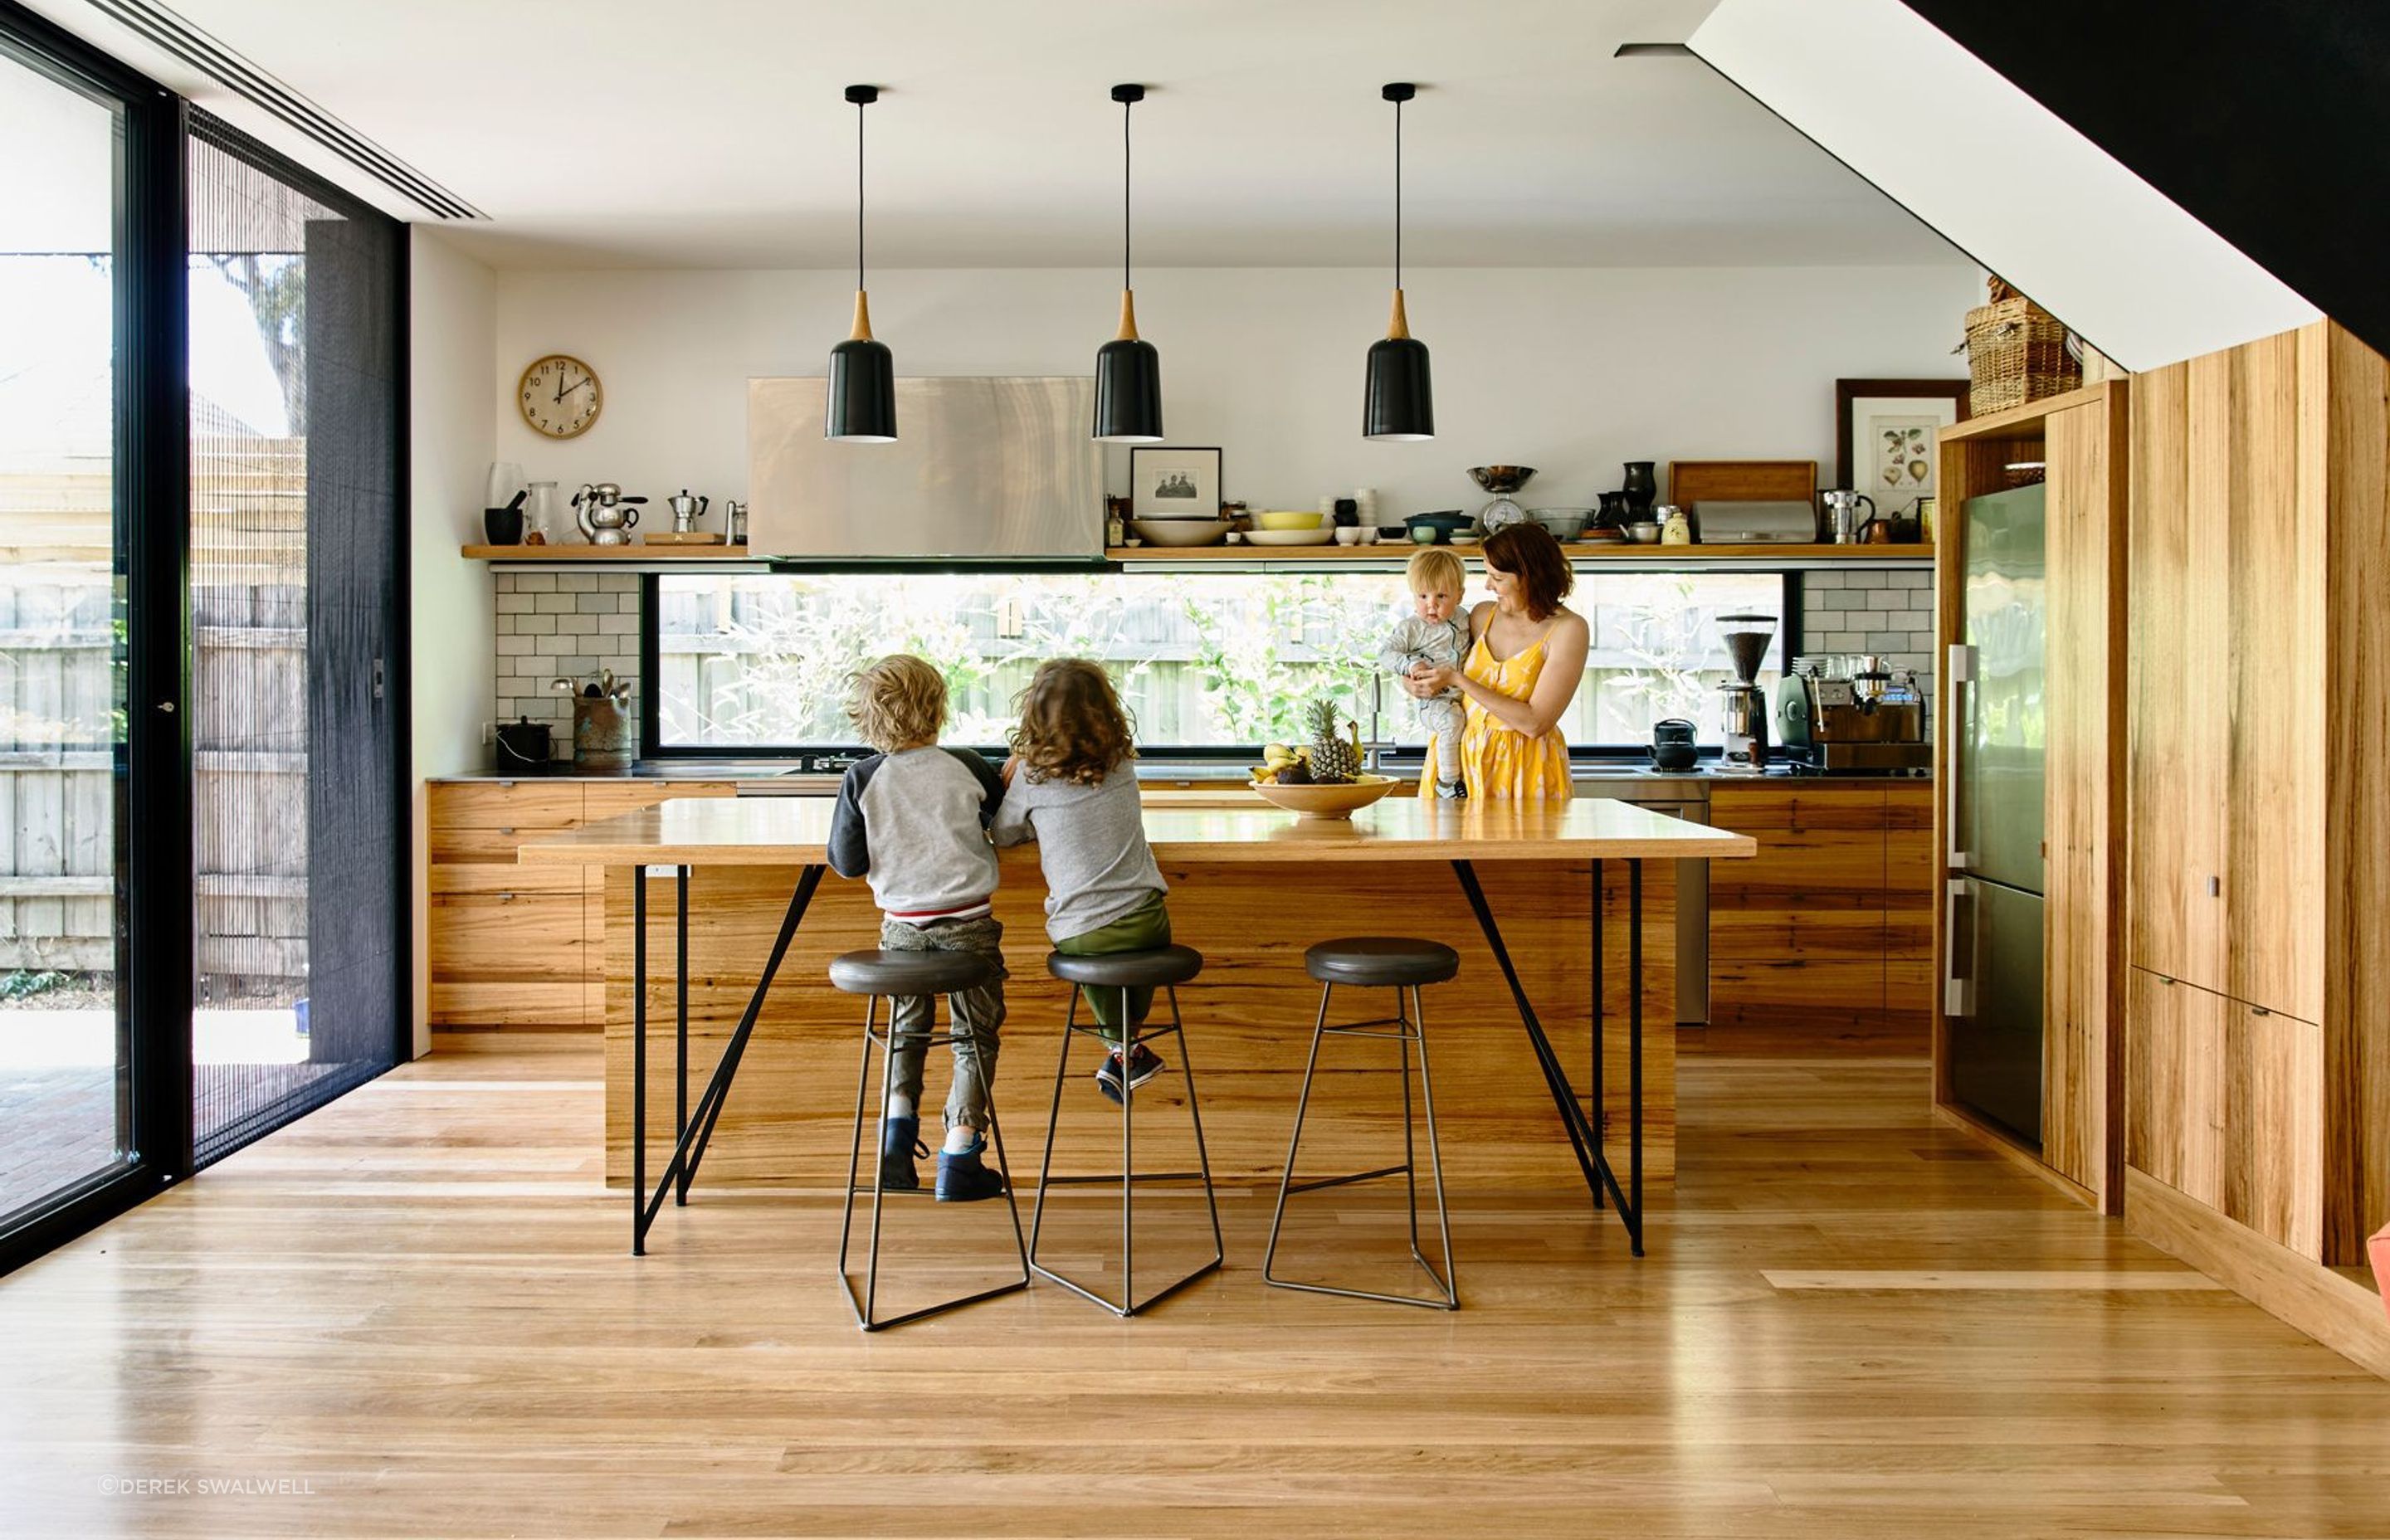 The timber kitchen draws the family together.